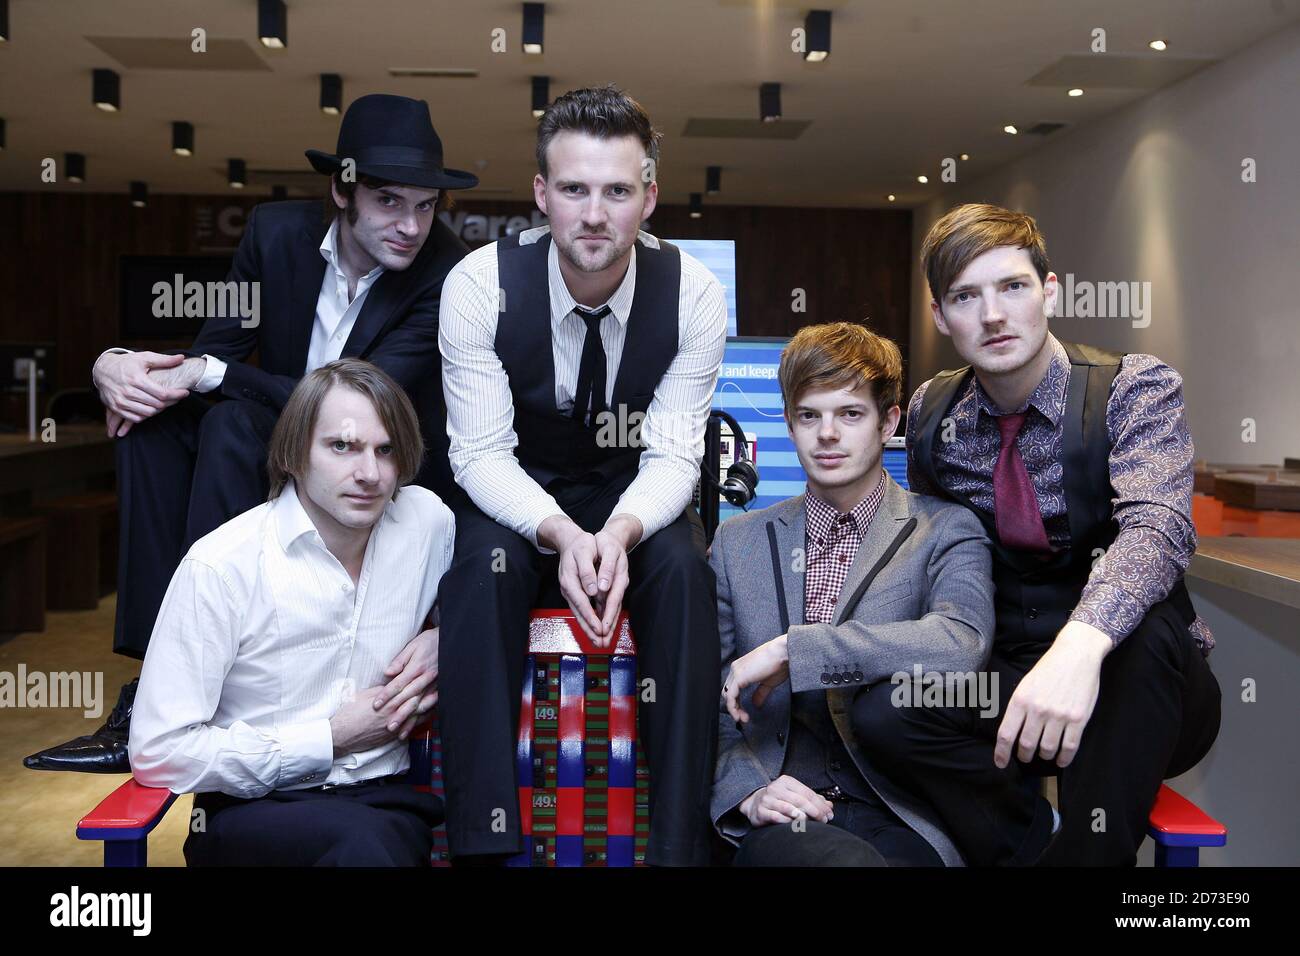 The Feeling (l-r) Ciaran Jeremiah, Kevin Jeremiah, Paul Stewart, Richard Jones, Dan Gillespie Sells, at the Carphone Warehouse on Oxford St in London, for the launch of the new Nokia Comes With Music service. Stock Photo